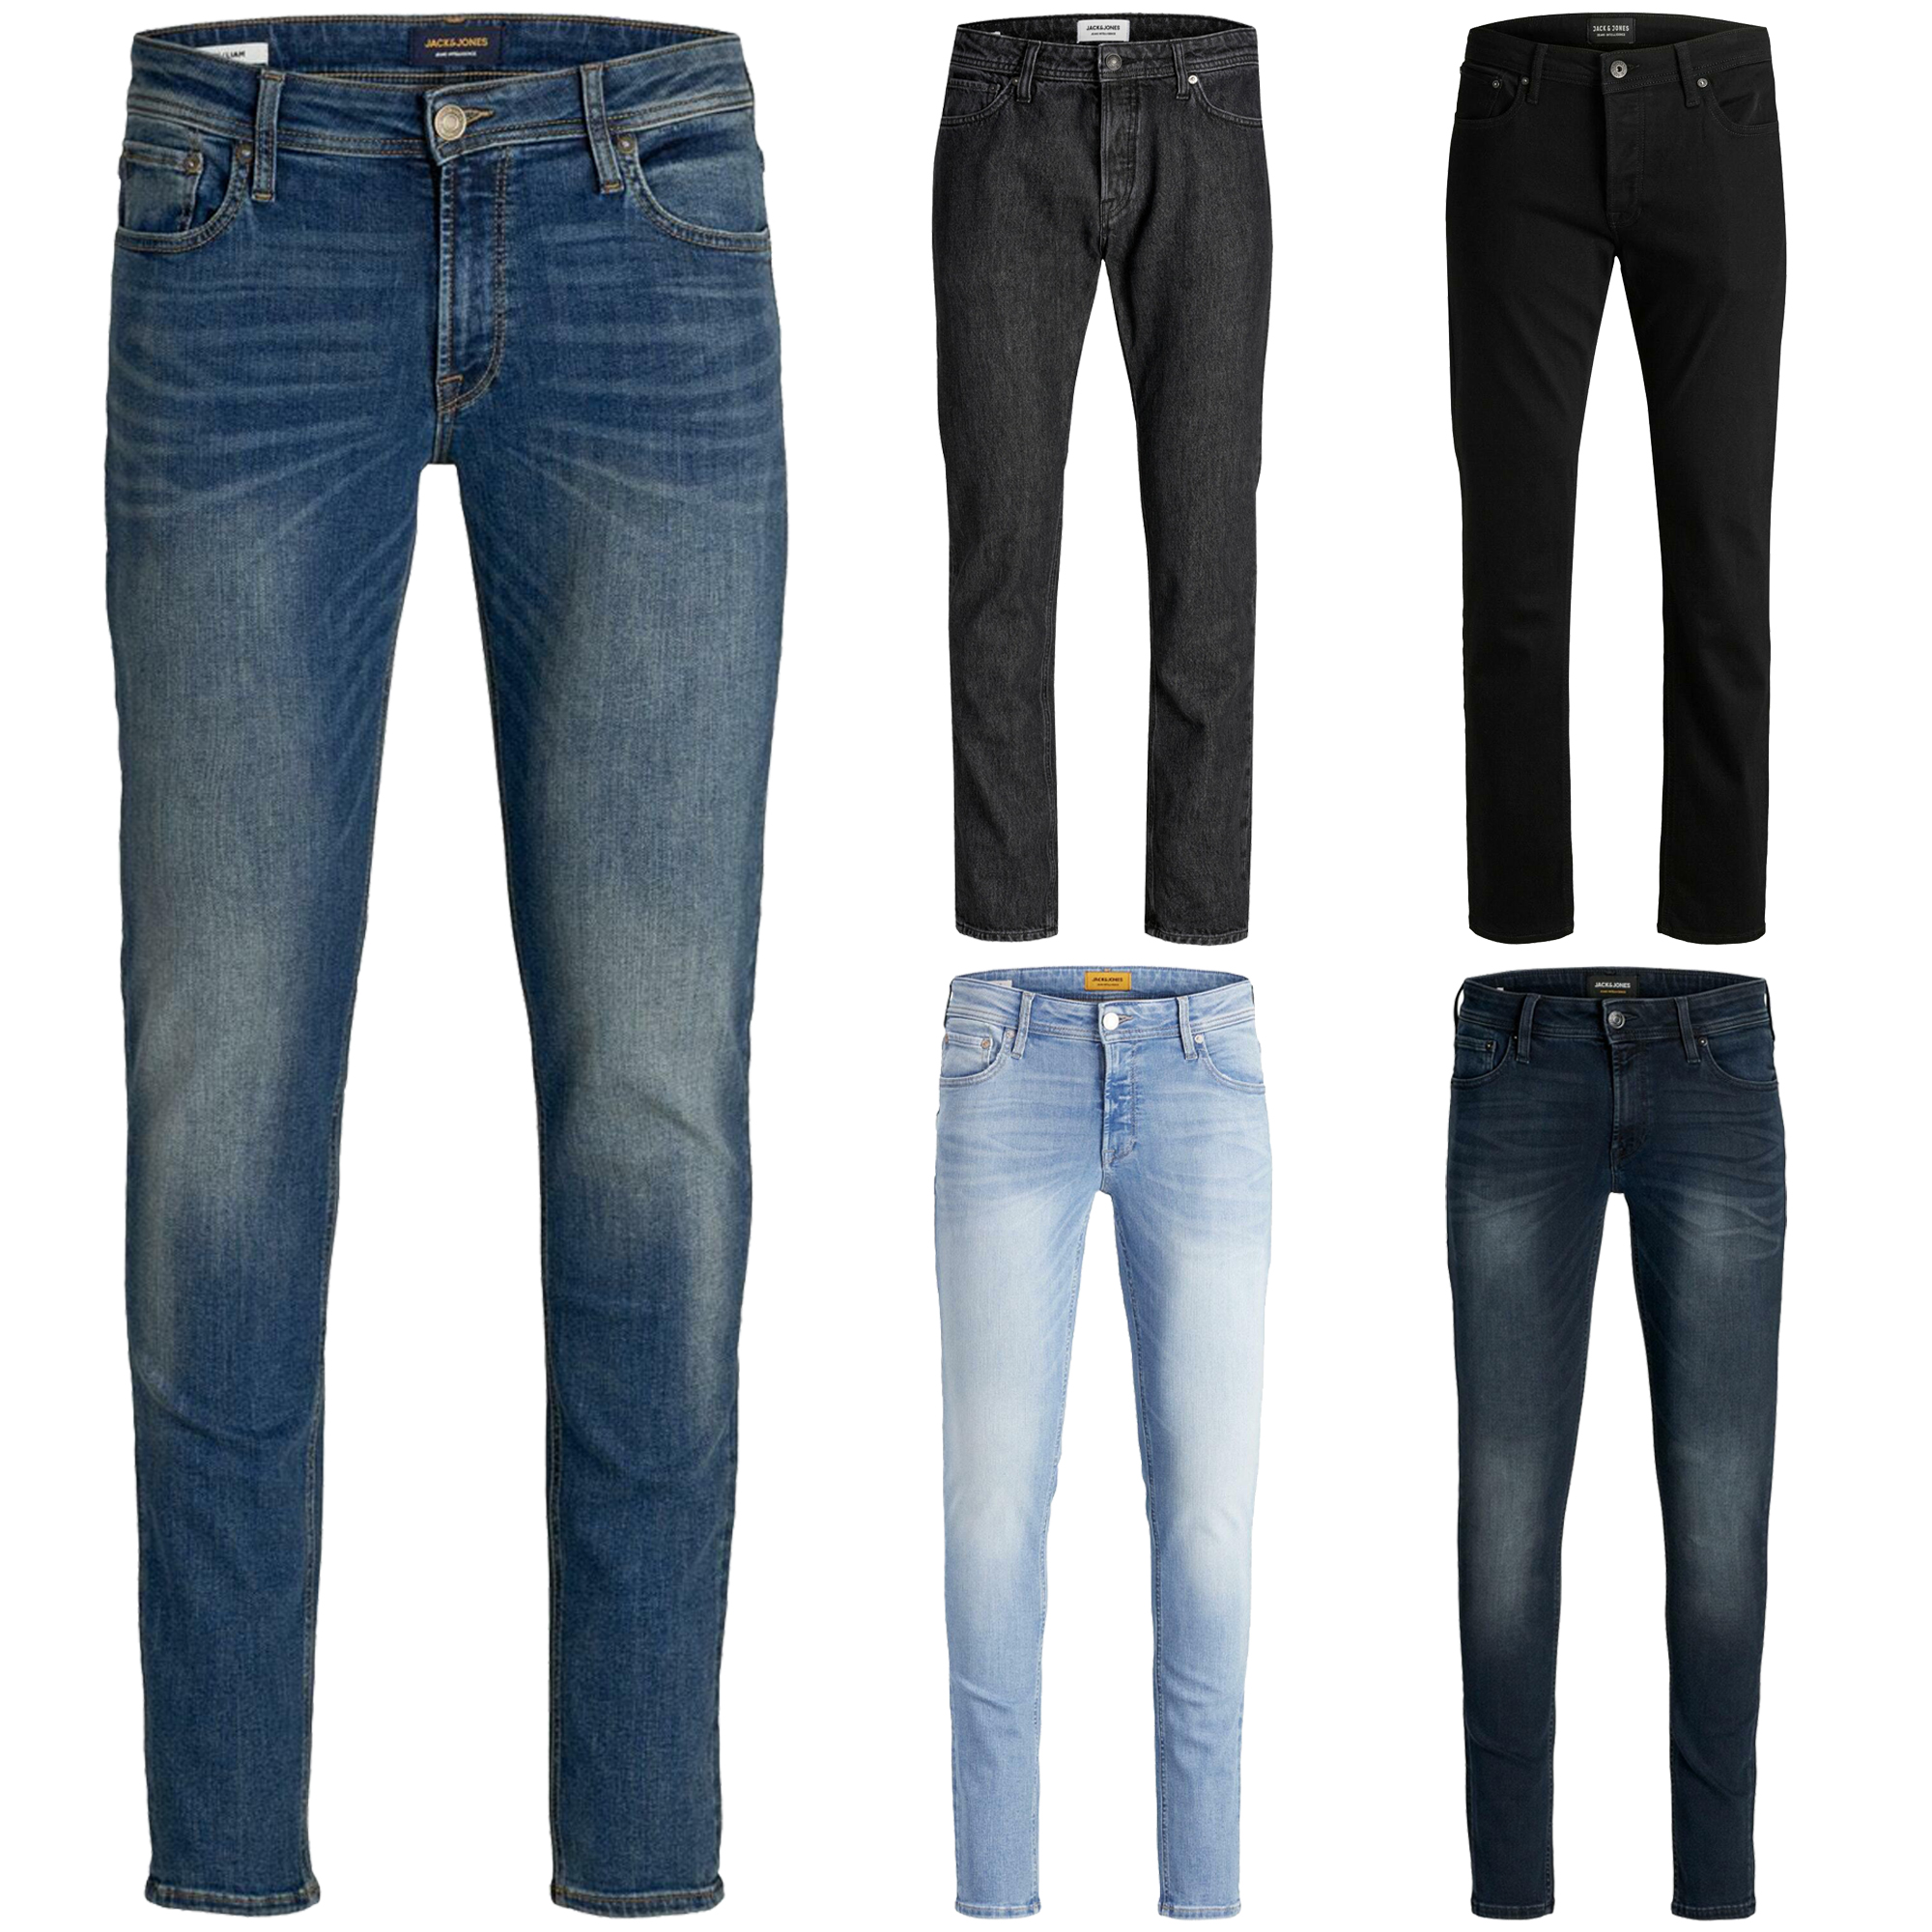 mike comfort fit jeans